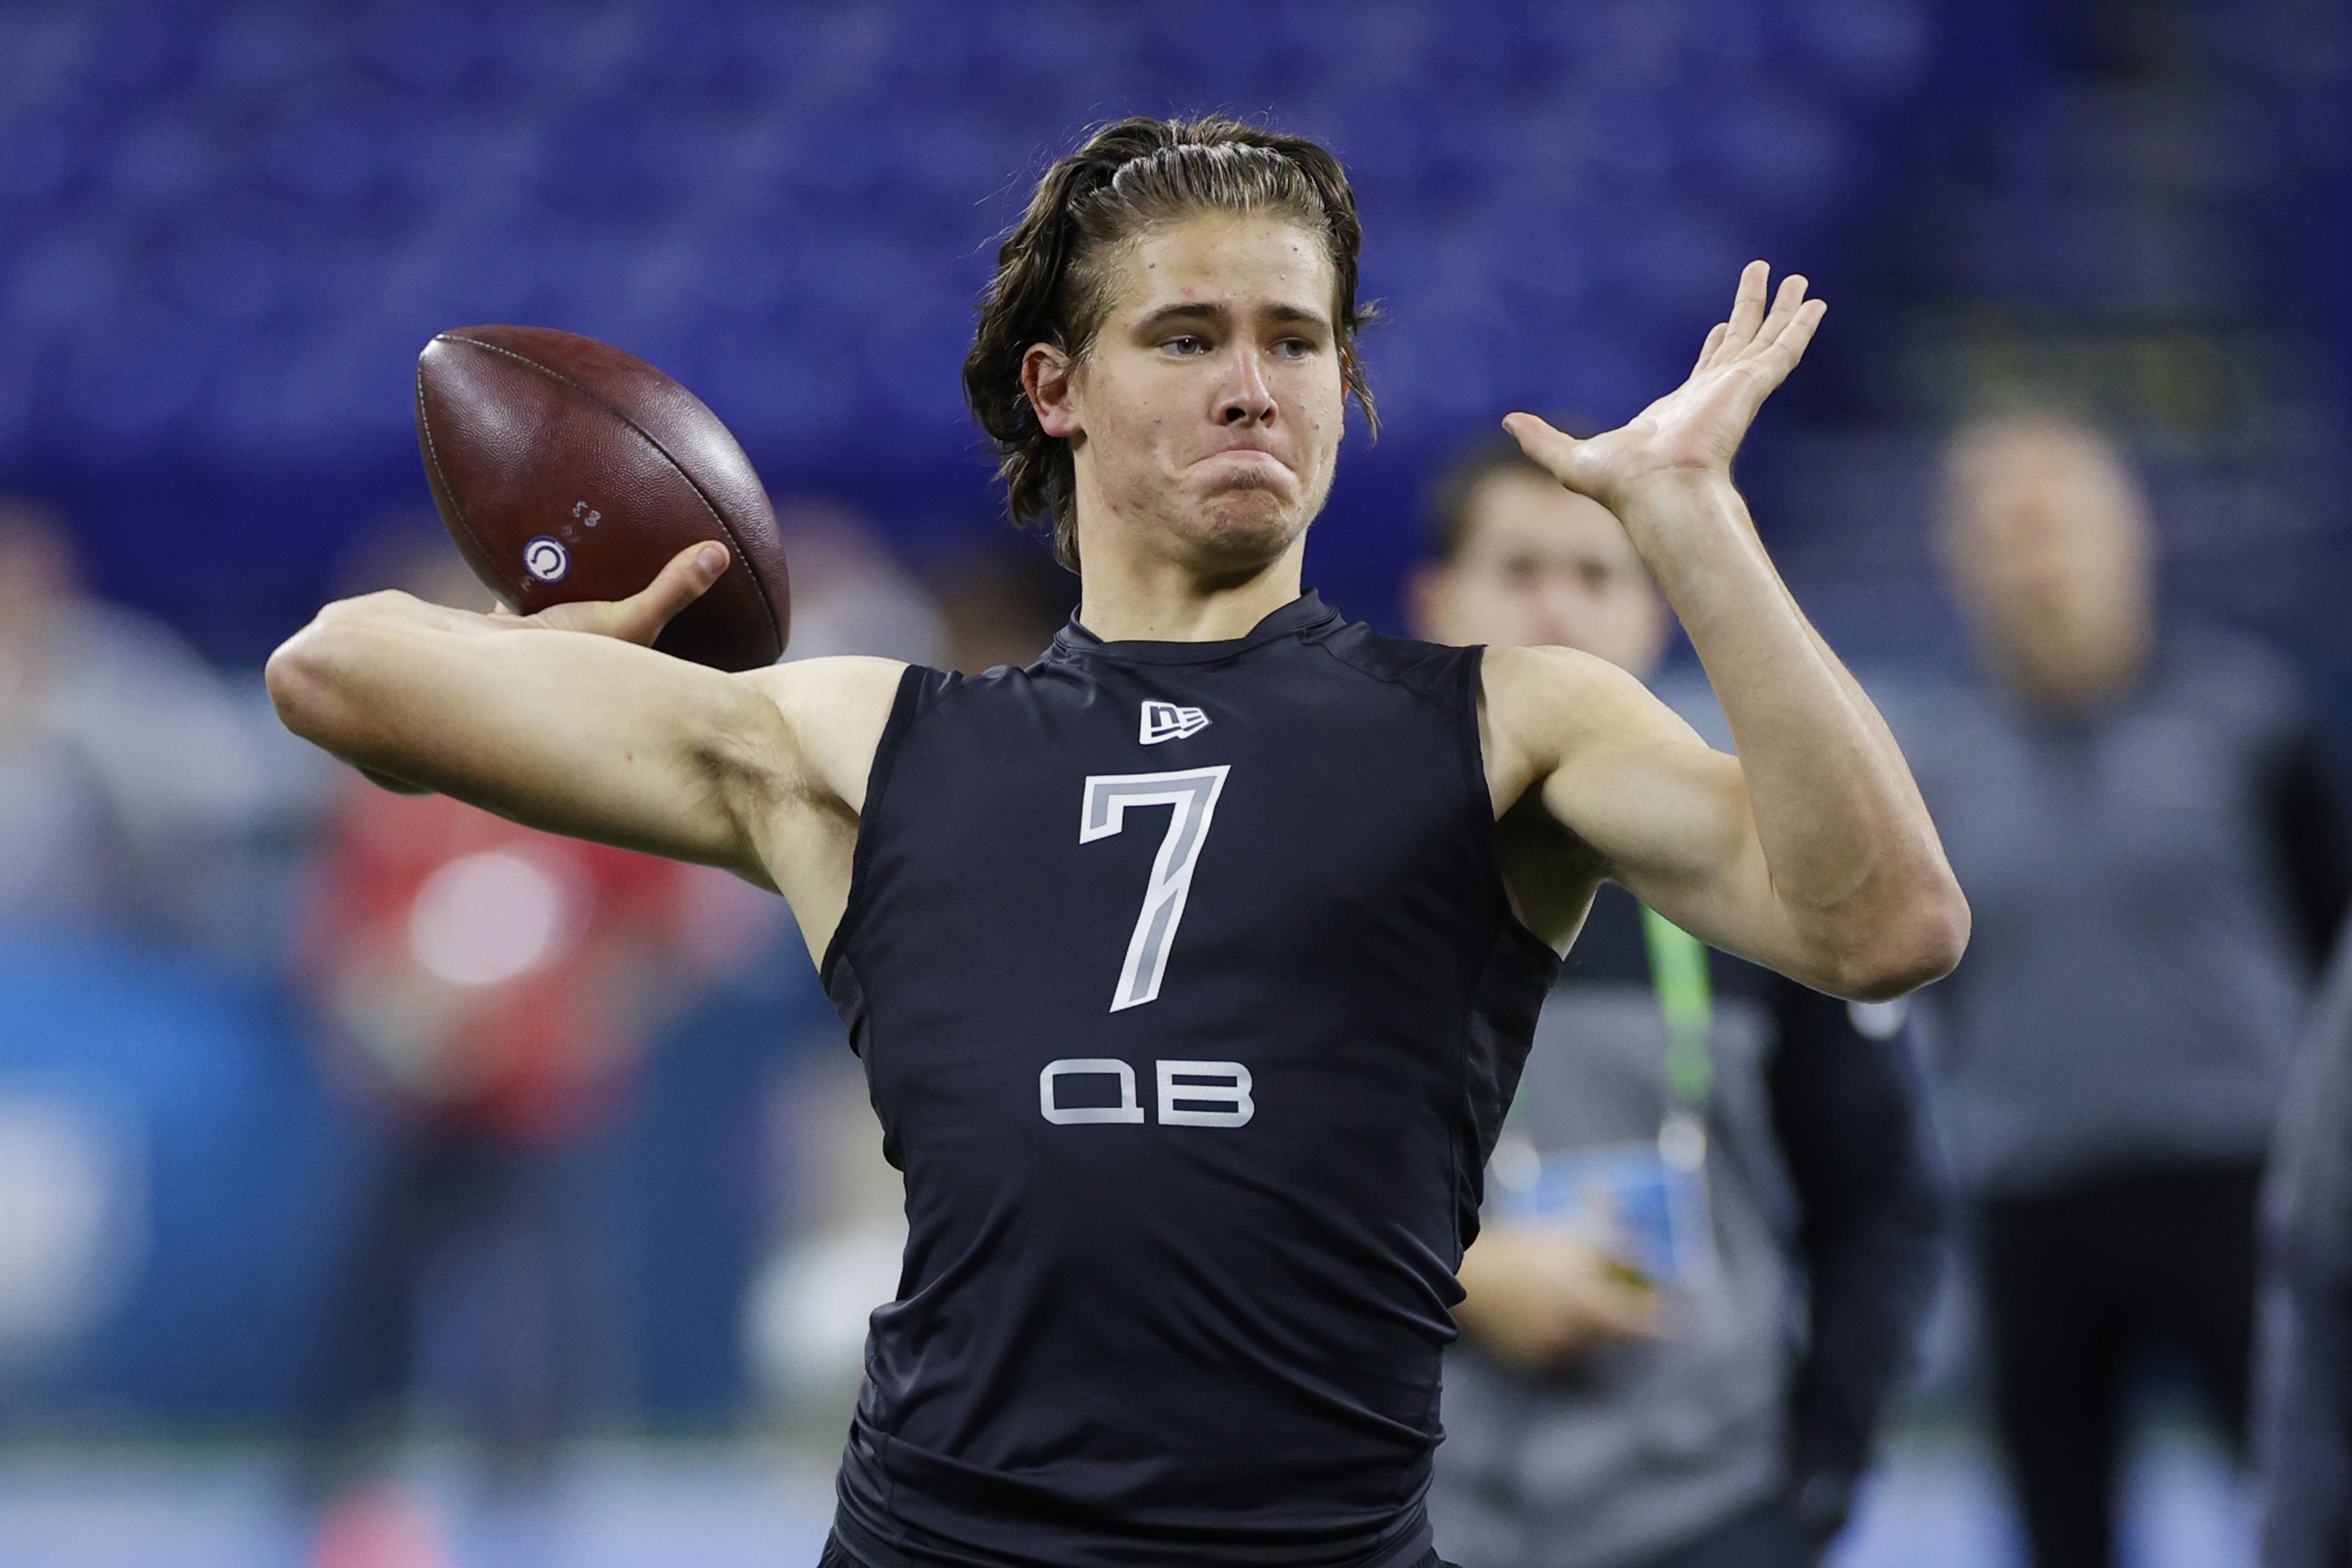 Justin Herbert Shows Off Arm Strength at Oregon Pro Day Ahead of